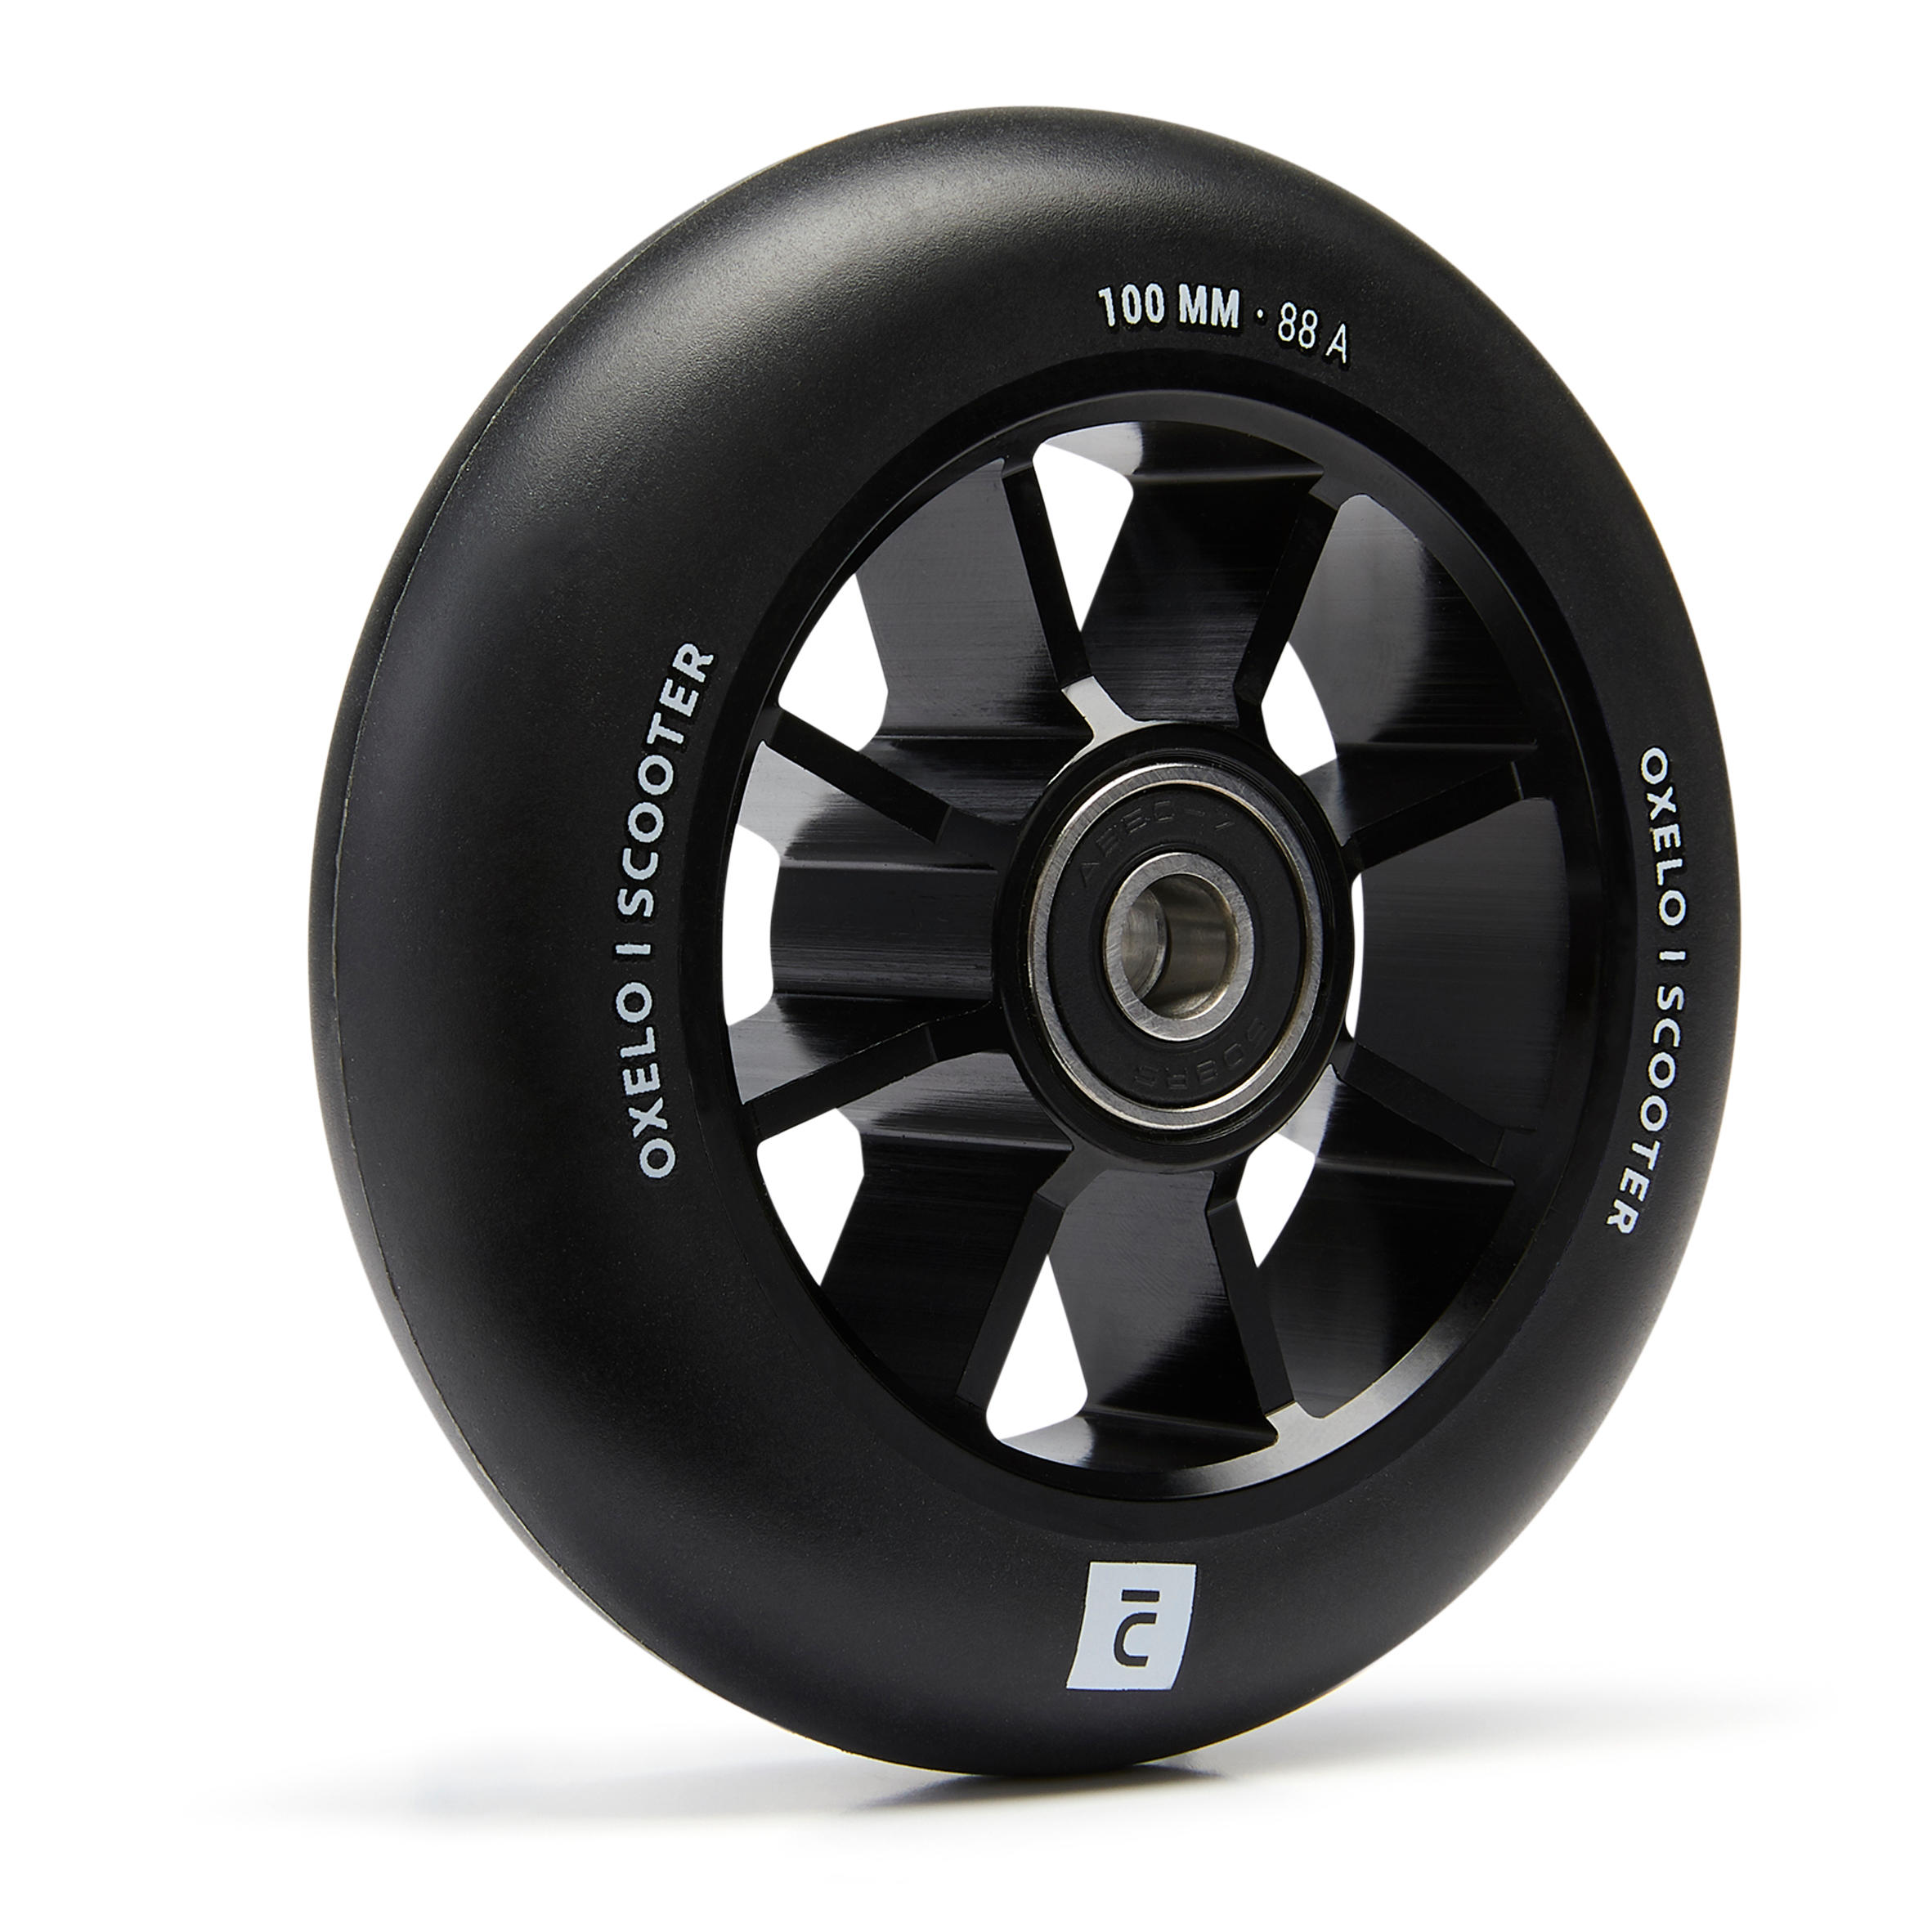 Freestyle Scotter Wheel 100 mm - PU85A - OXELO